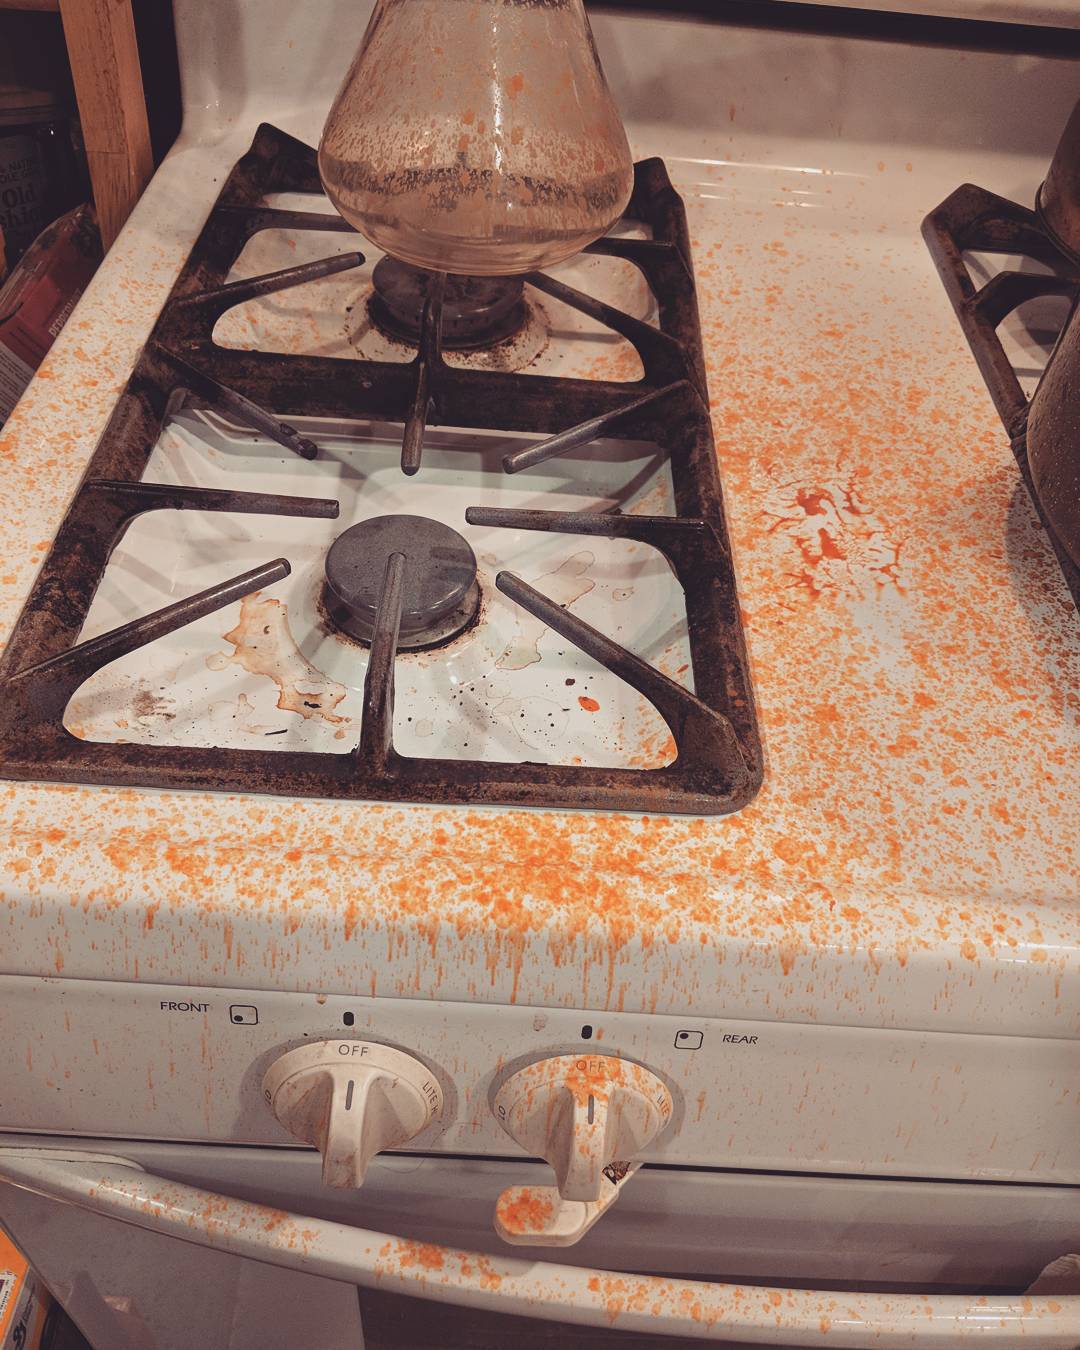 “Pumpkin volcanoes are the messiest of all kitchen volcanoes.”